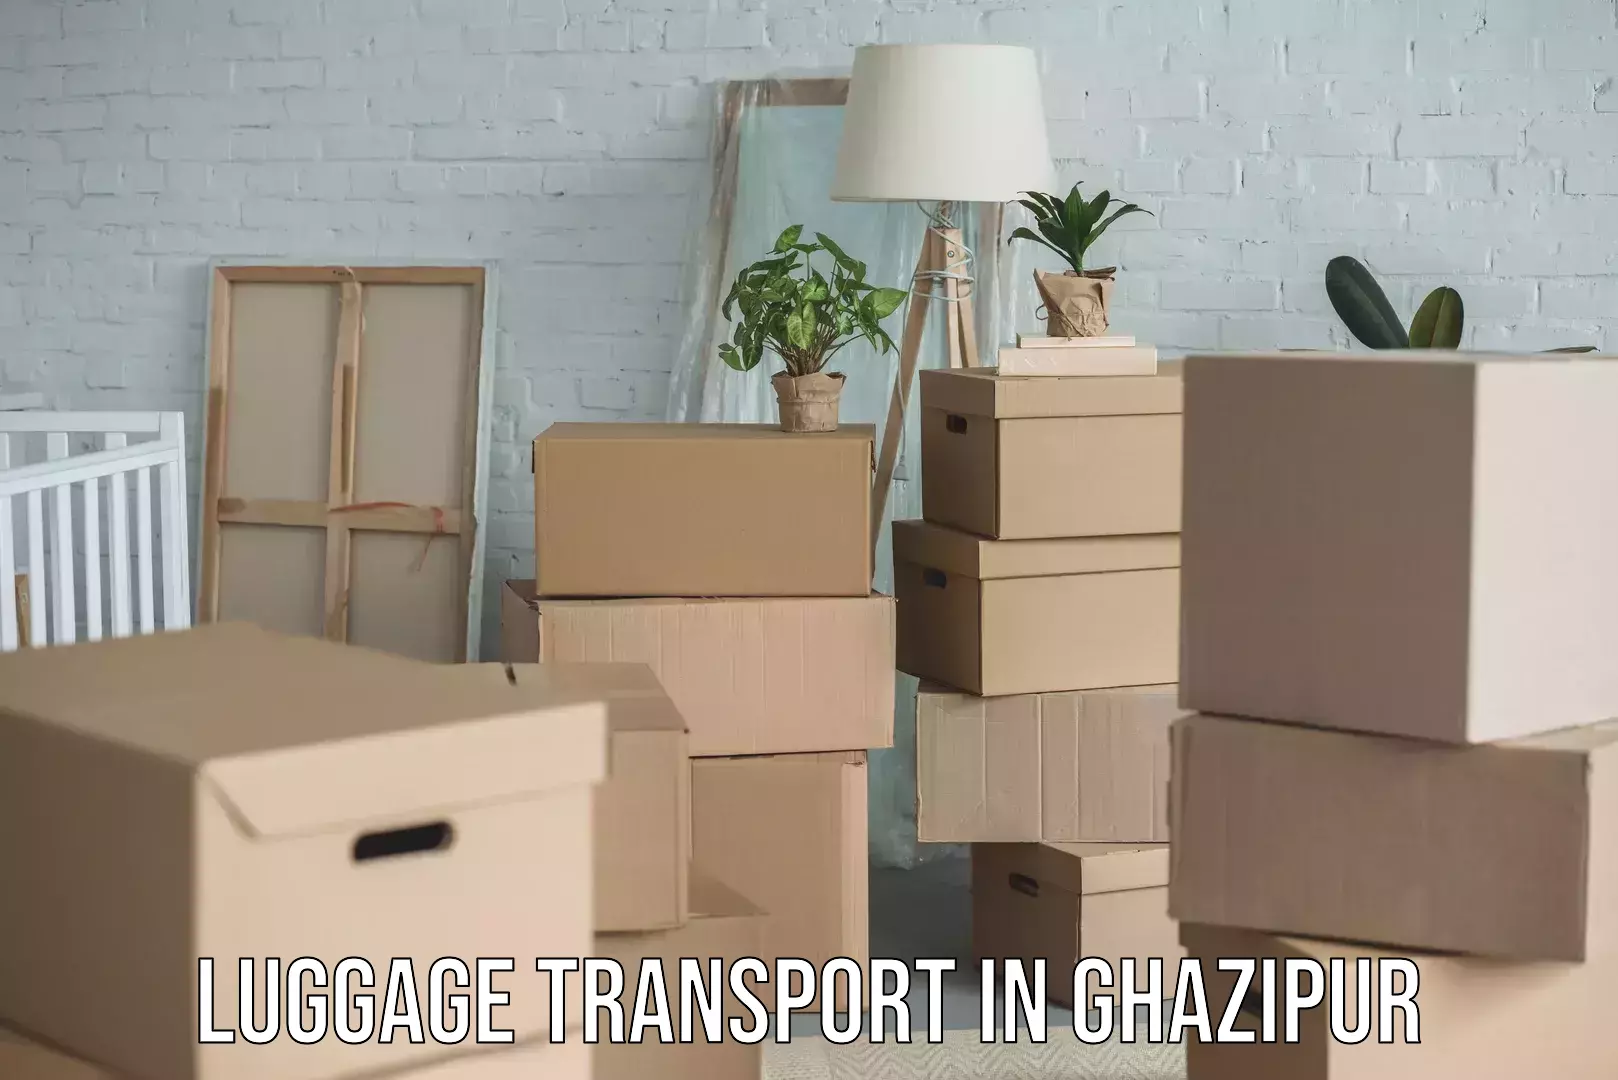 Luggage transport tips in Ghazipur